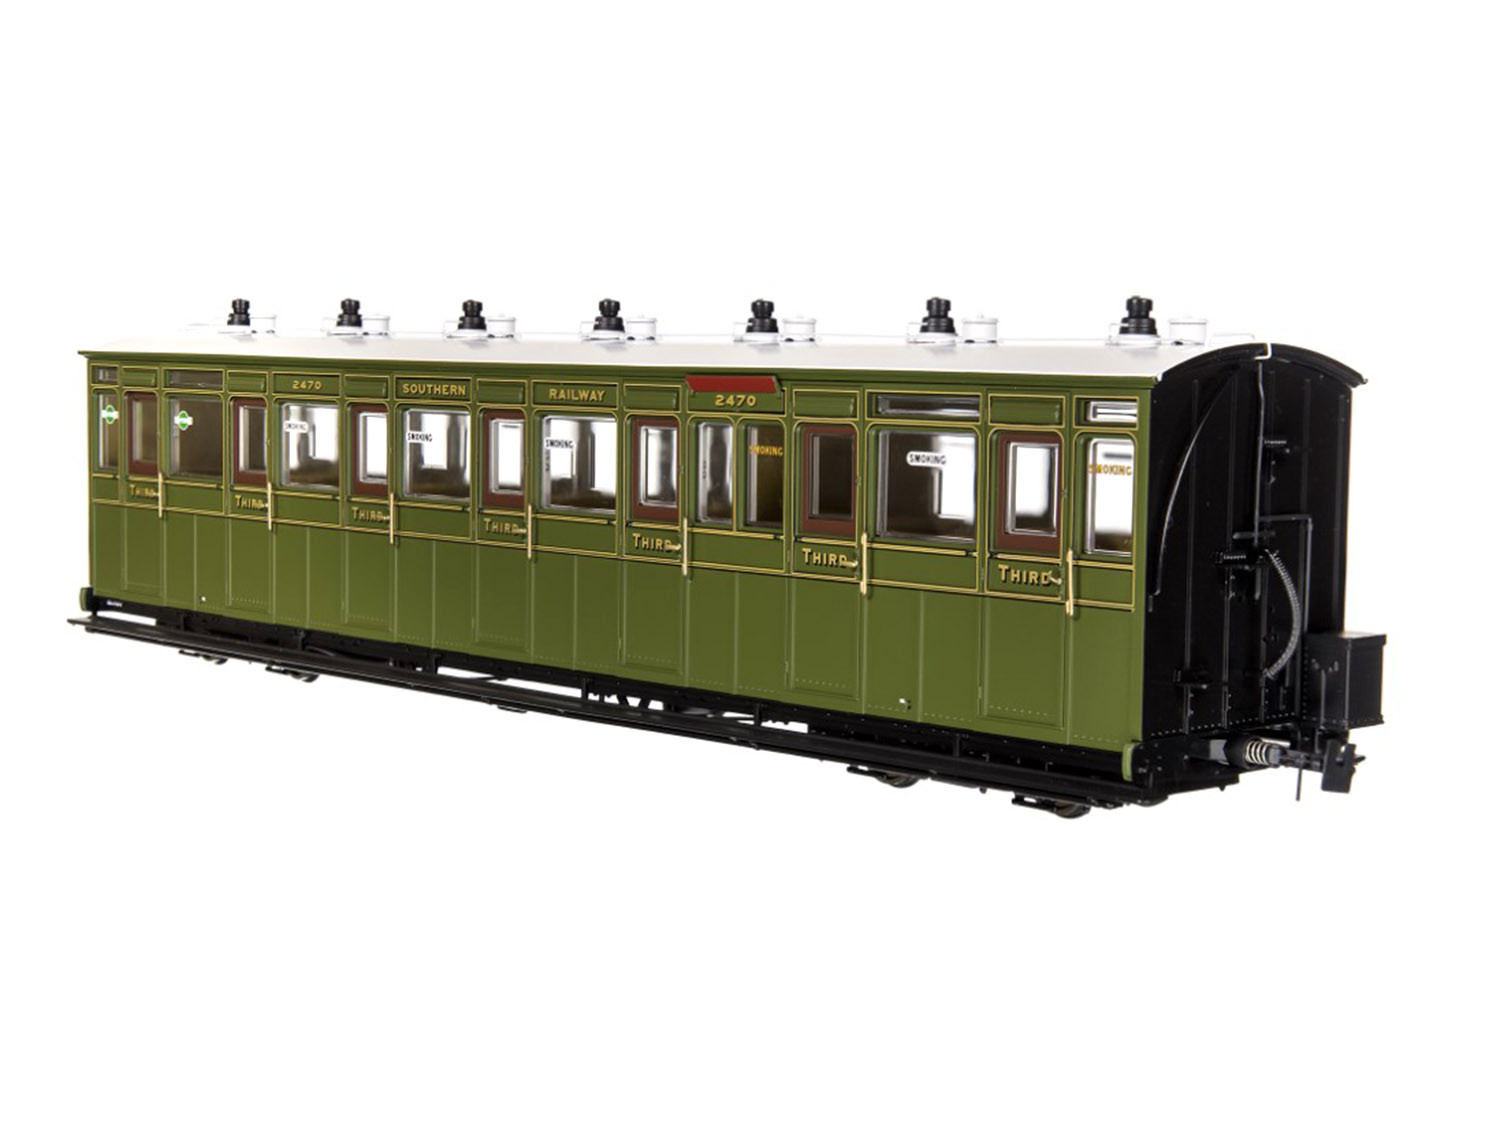 Southern All 3rd Coach 2470 1924-1935